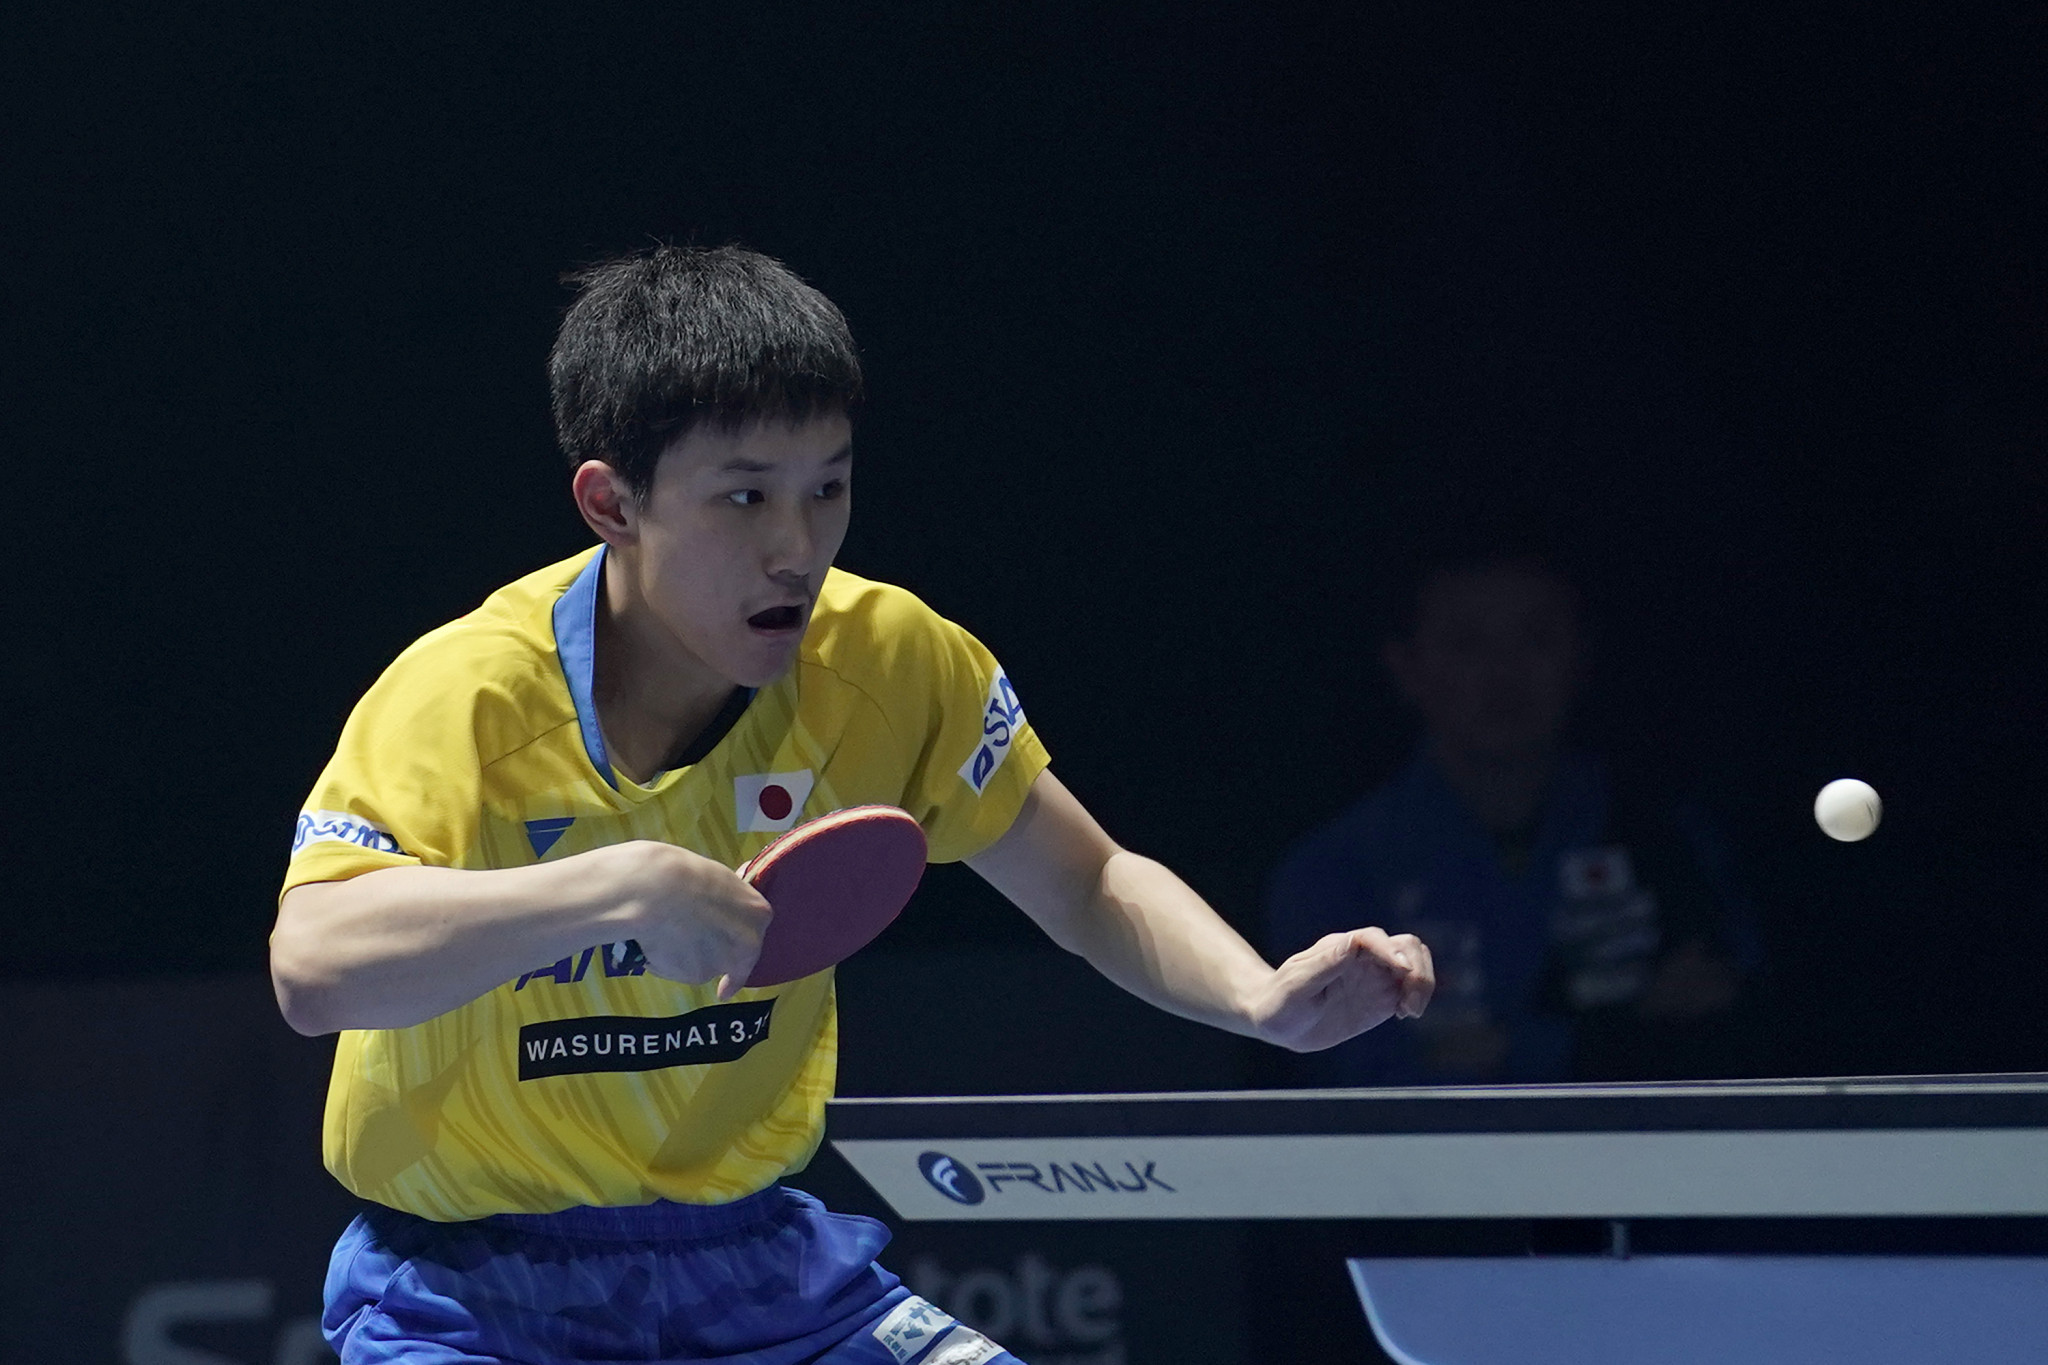 Japanese table tennis player and Olympic medal hope Harimoto returns to competition